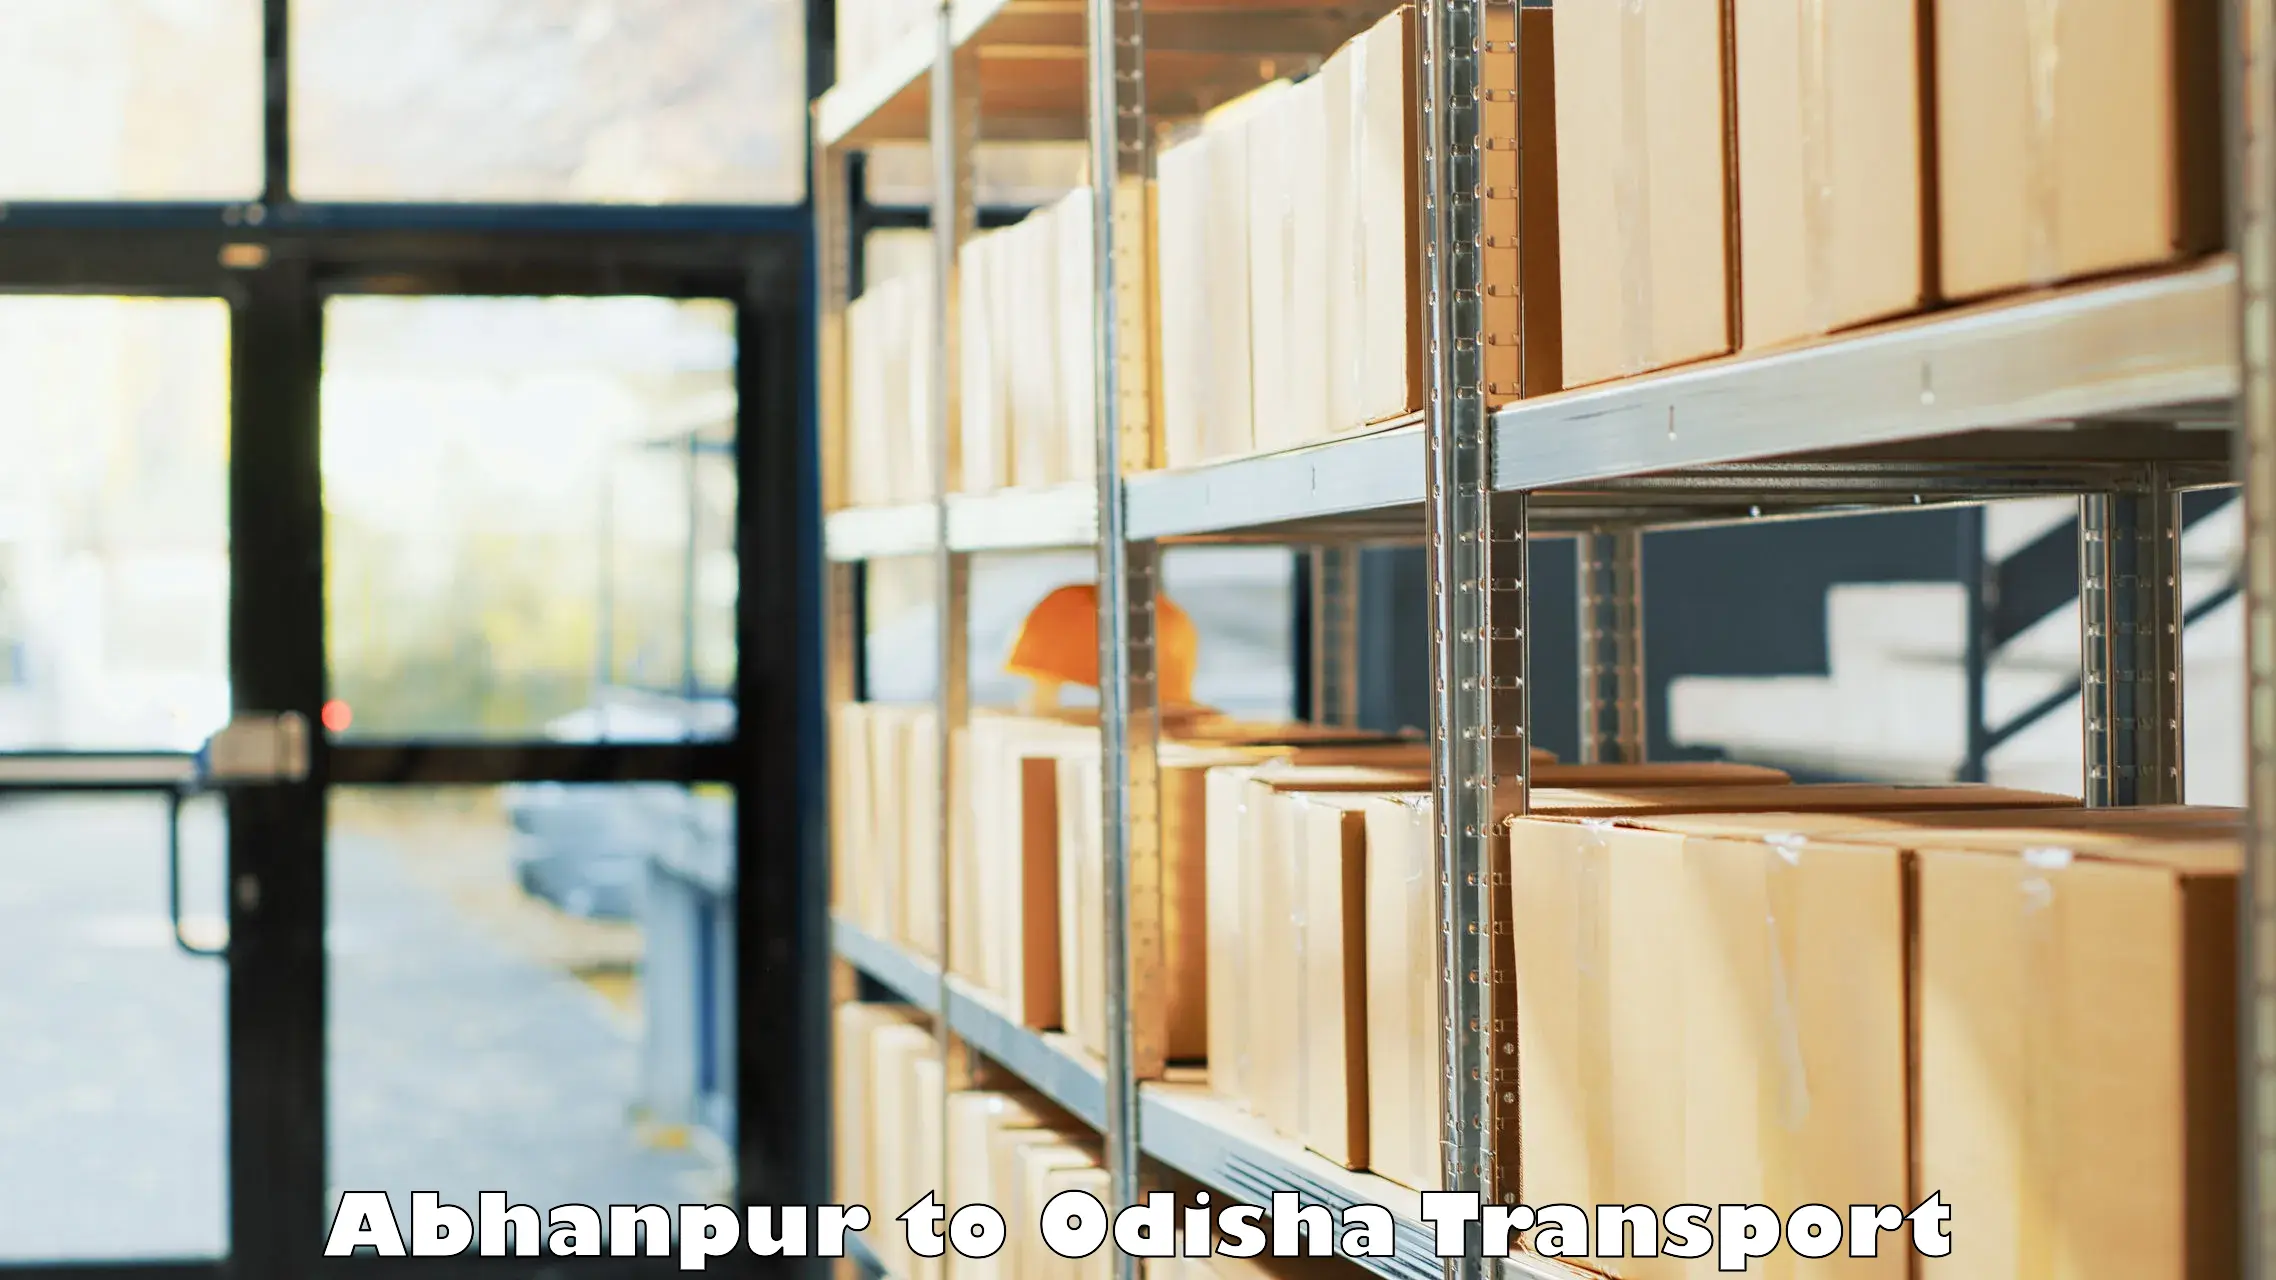 Land transport services in Abhanpur to Bamra